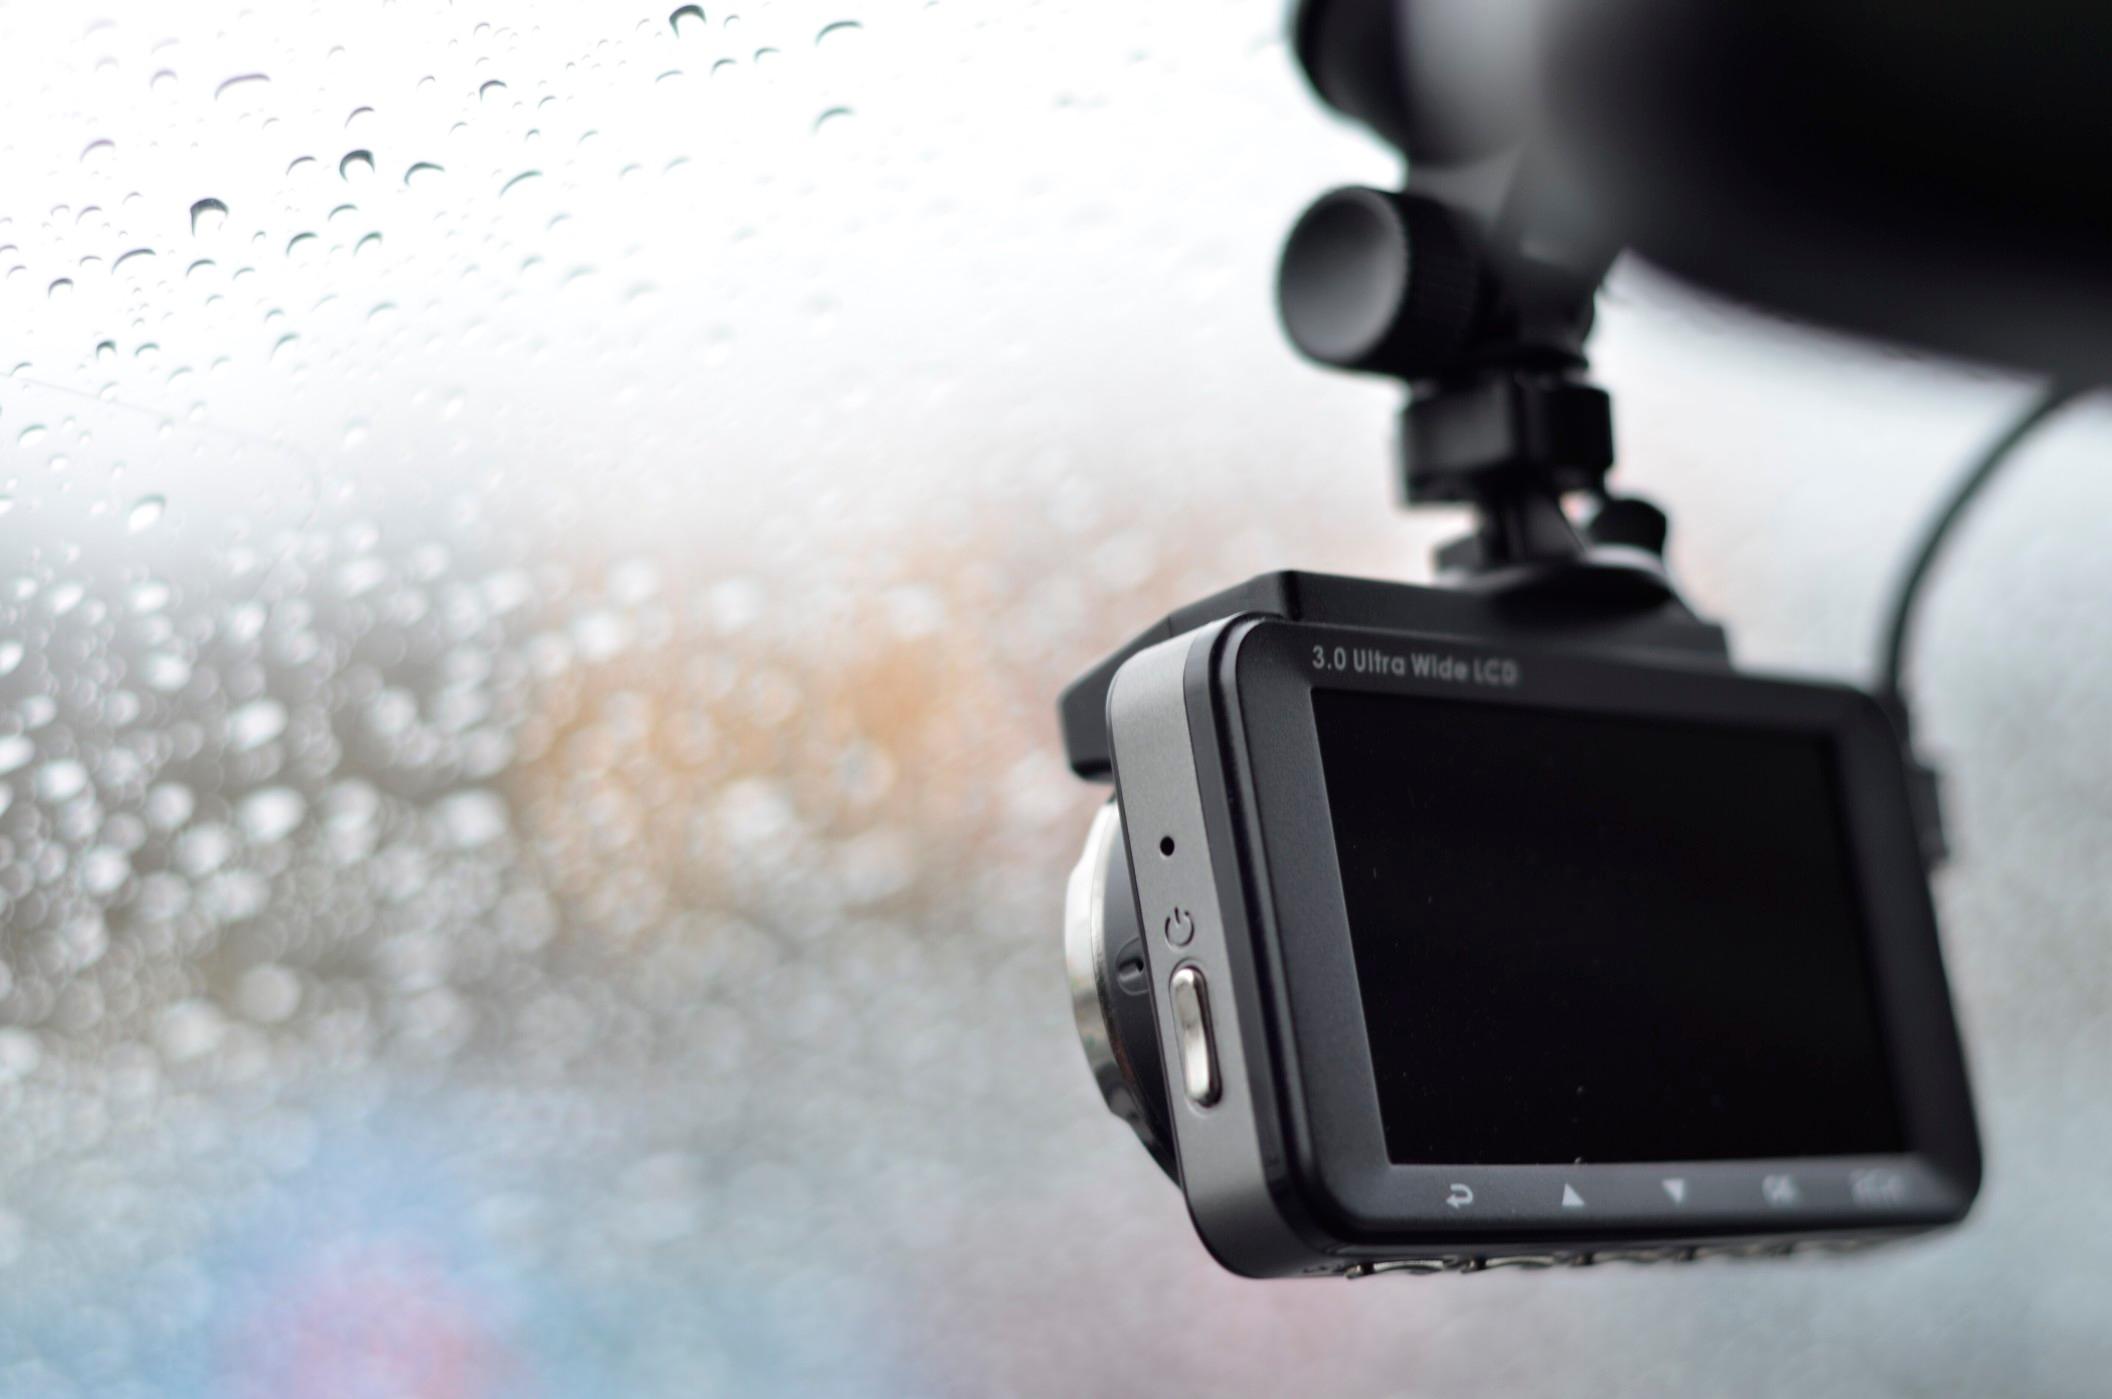 Dashcams can record your surroundings in the event of an accident